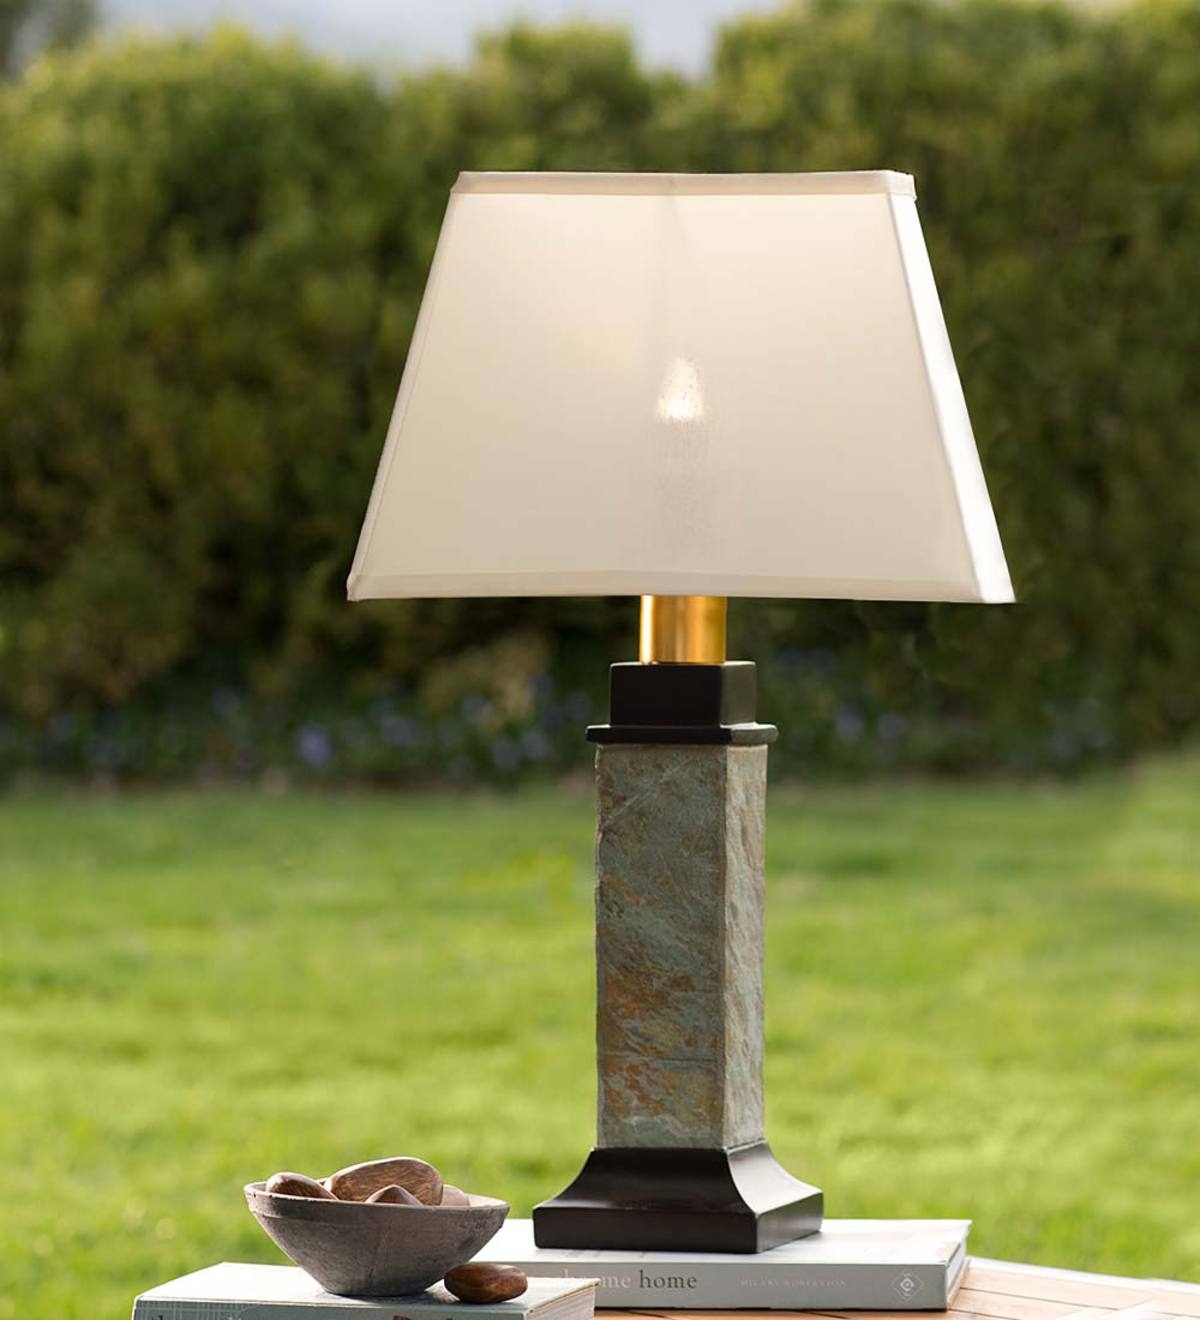 https://visualhunt.com/photos/10/outdoor-slate-table-lamp-with-removable-battery-operated.jpg